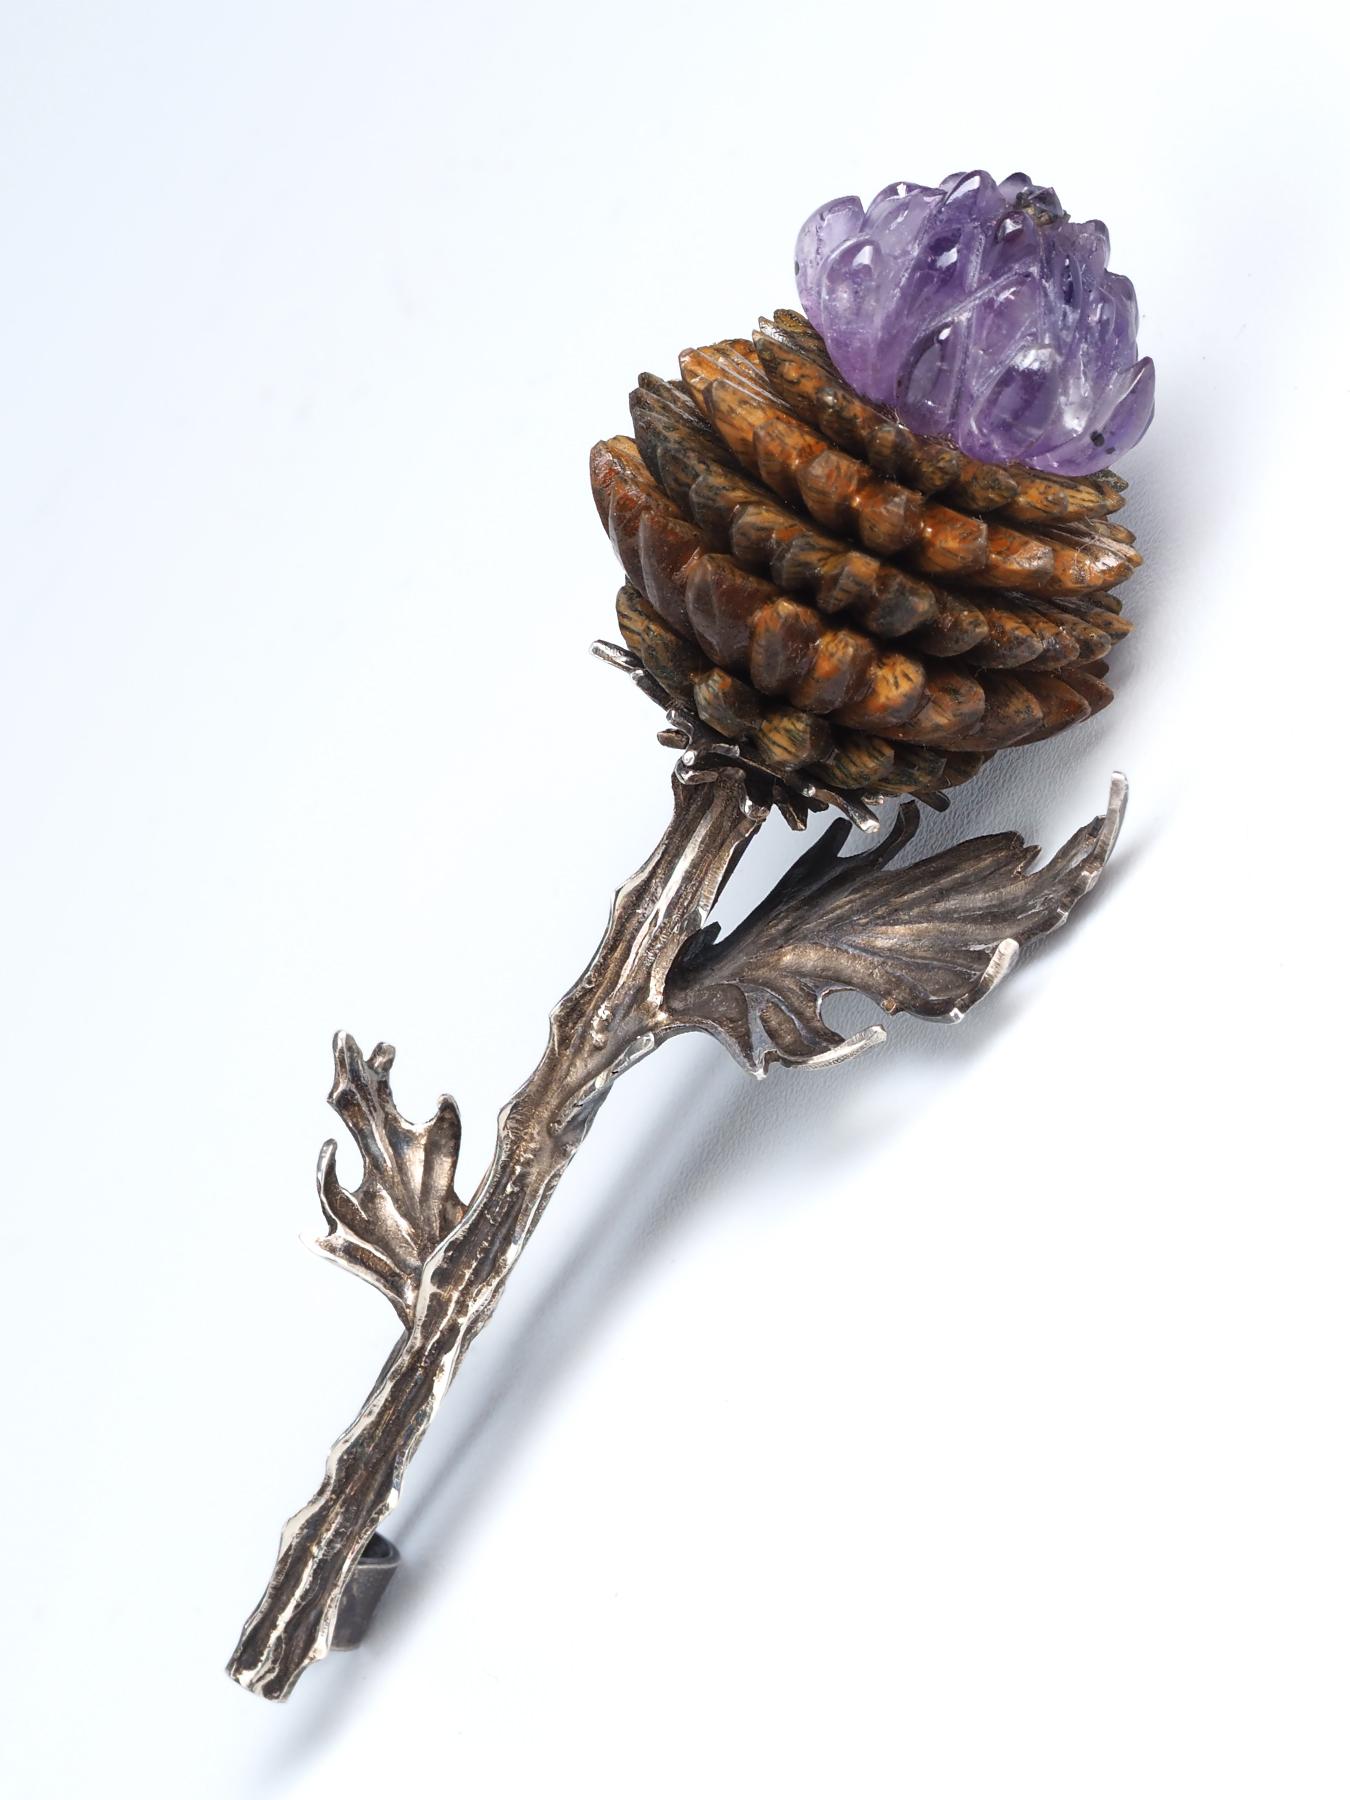 Artichoke Carved Amethyst and Wood Silver Brooch

brooch length 70 mm

brooch width 25 mm 

carved amethyst measurements 25 x 17 mm

weight 13 grams 
